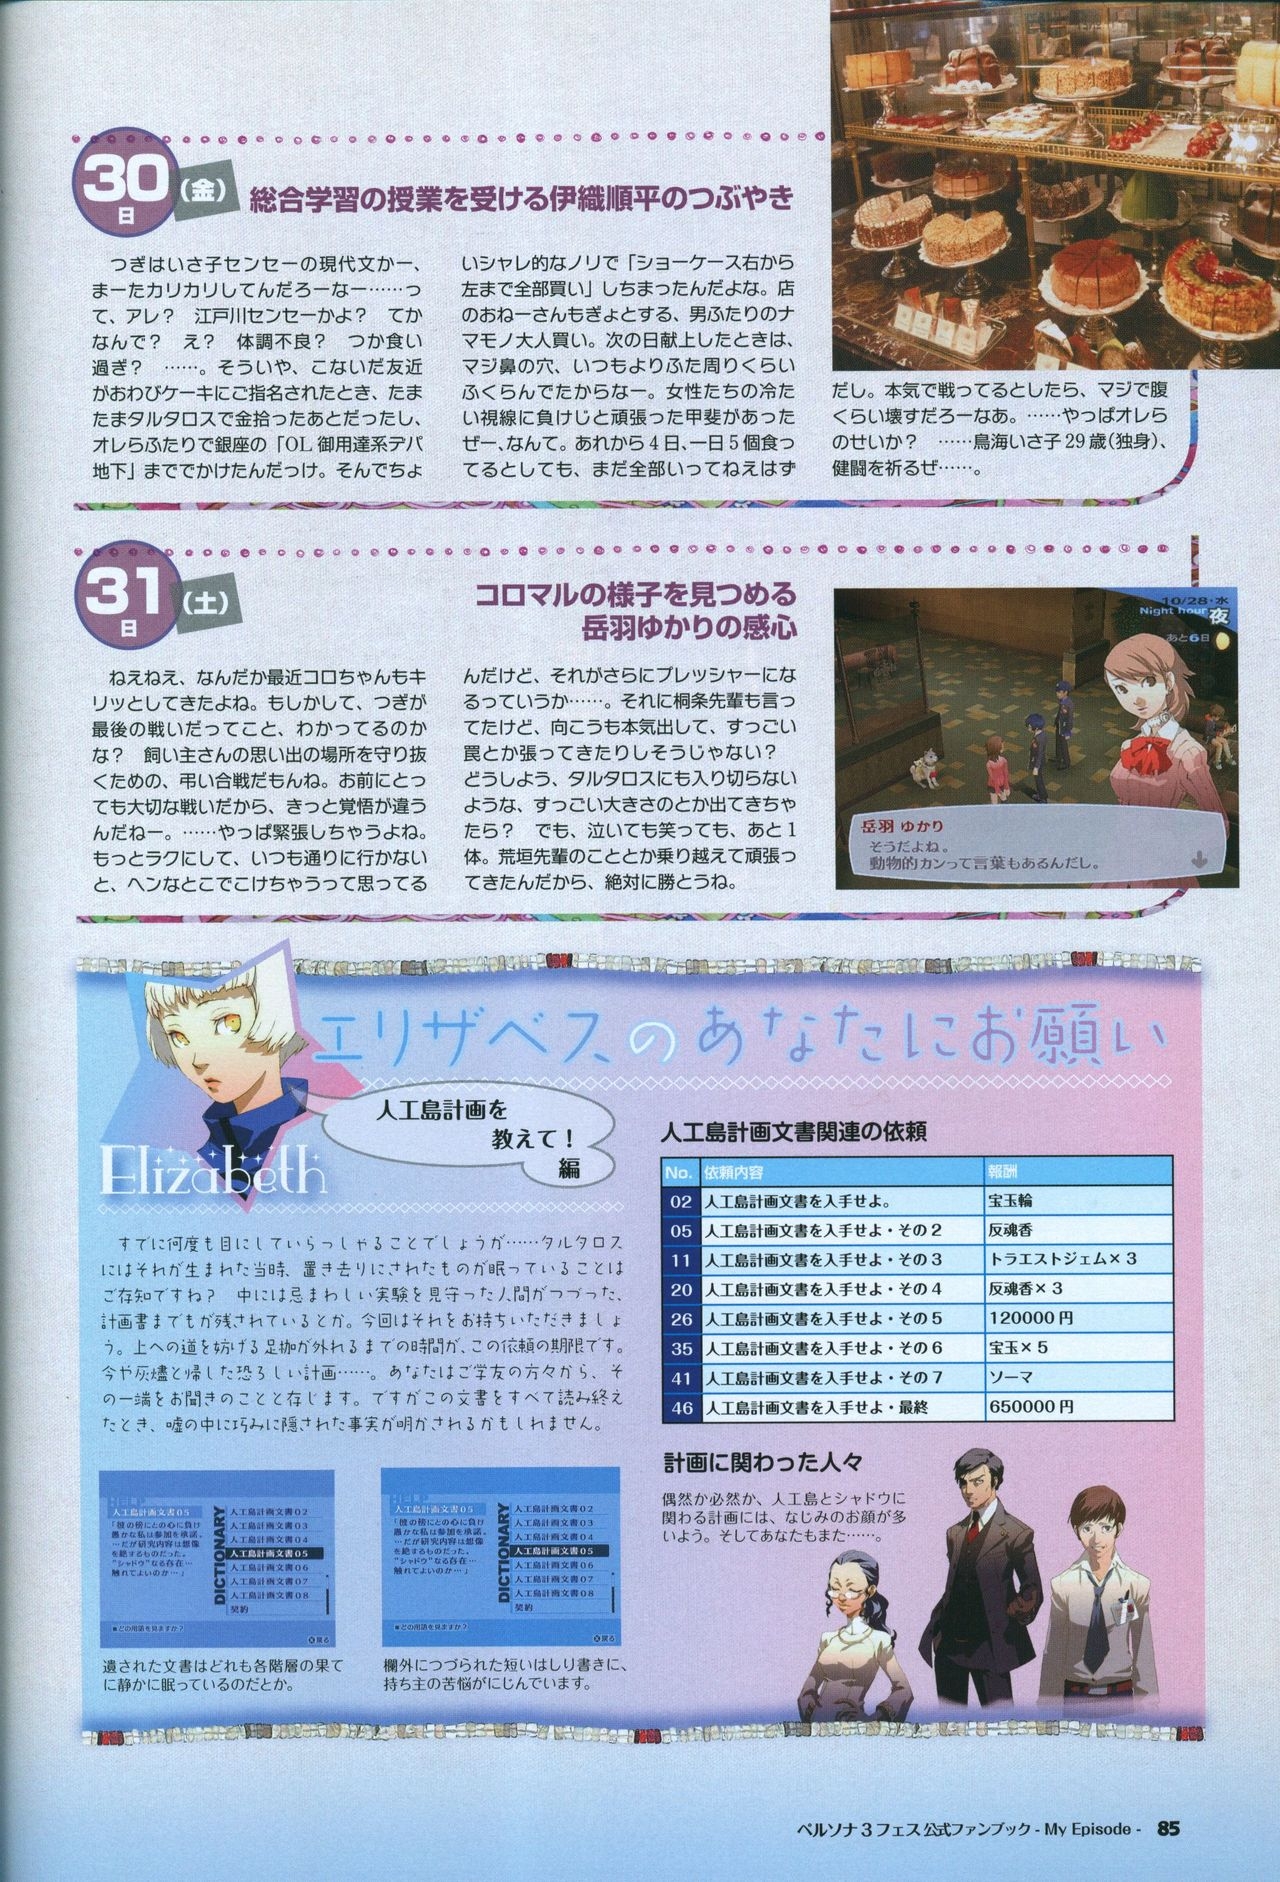 Persona 3 Fes Official Fan Book -My Episode- 86